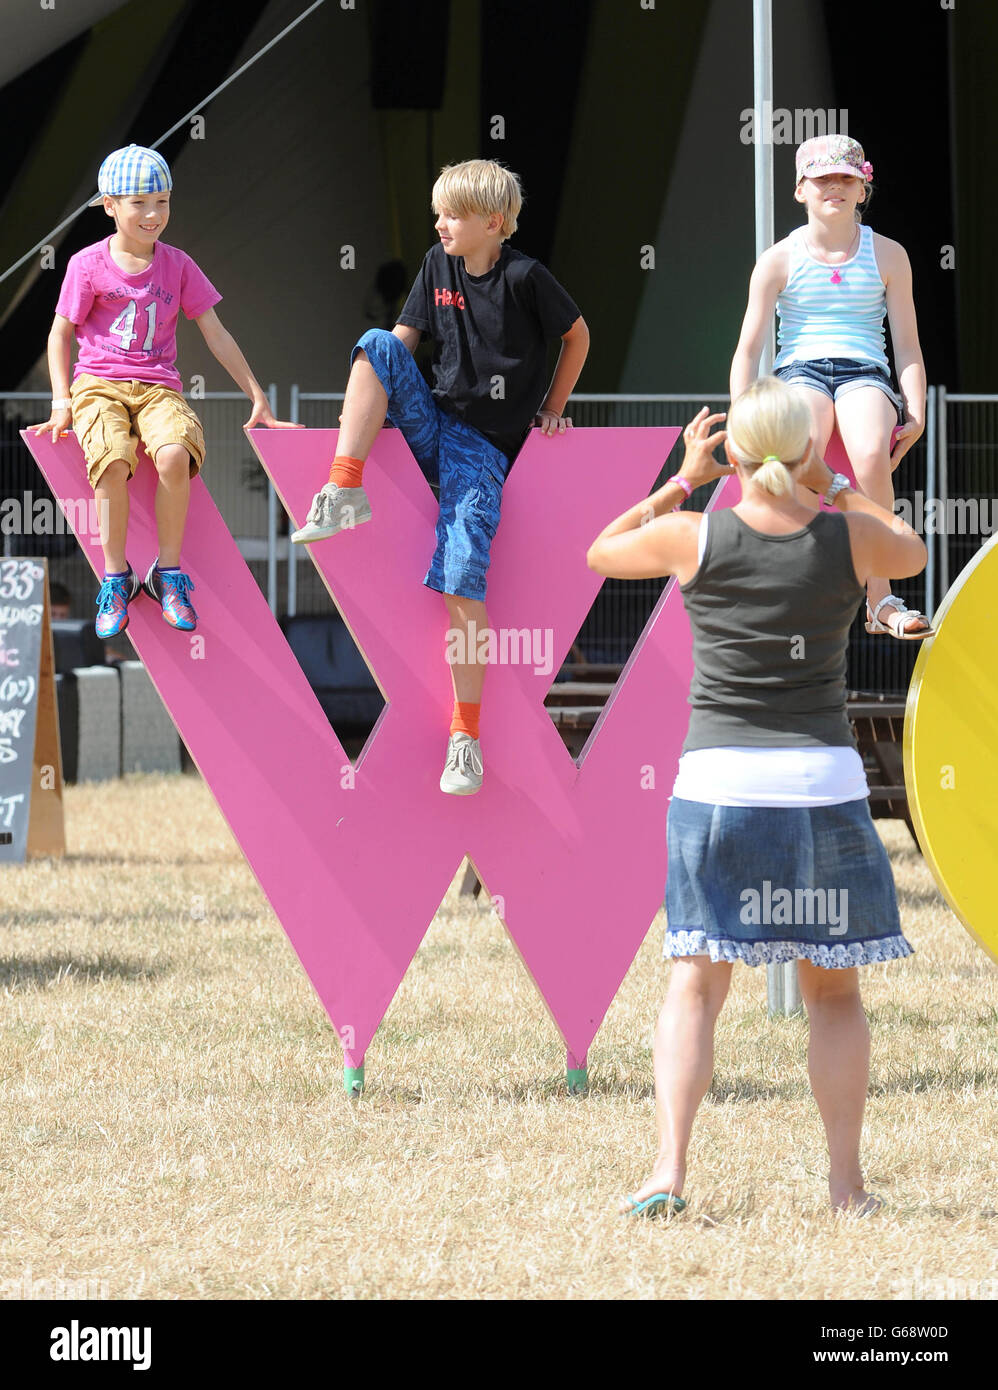 Womad Festival 2013. Children pose for a photograph on a sculpture during Womad festival 2013, held at Charlton Park in Wiltshire. Stock Photo